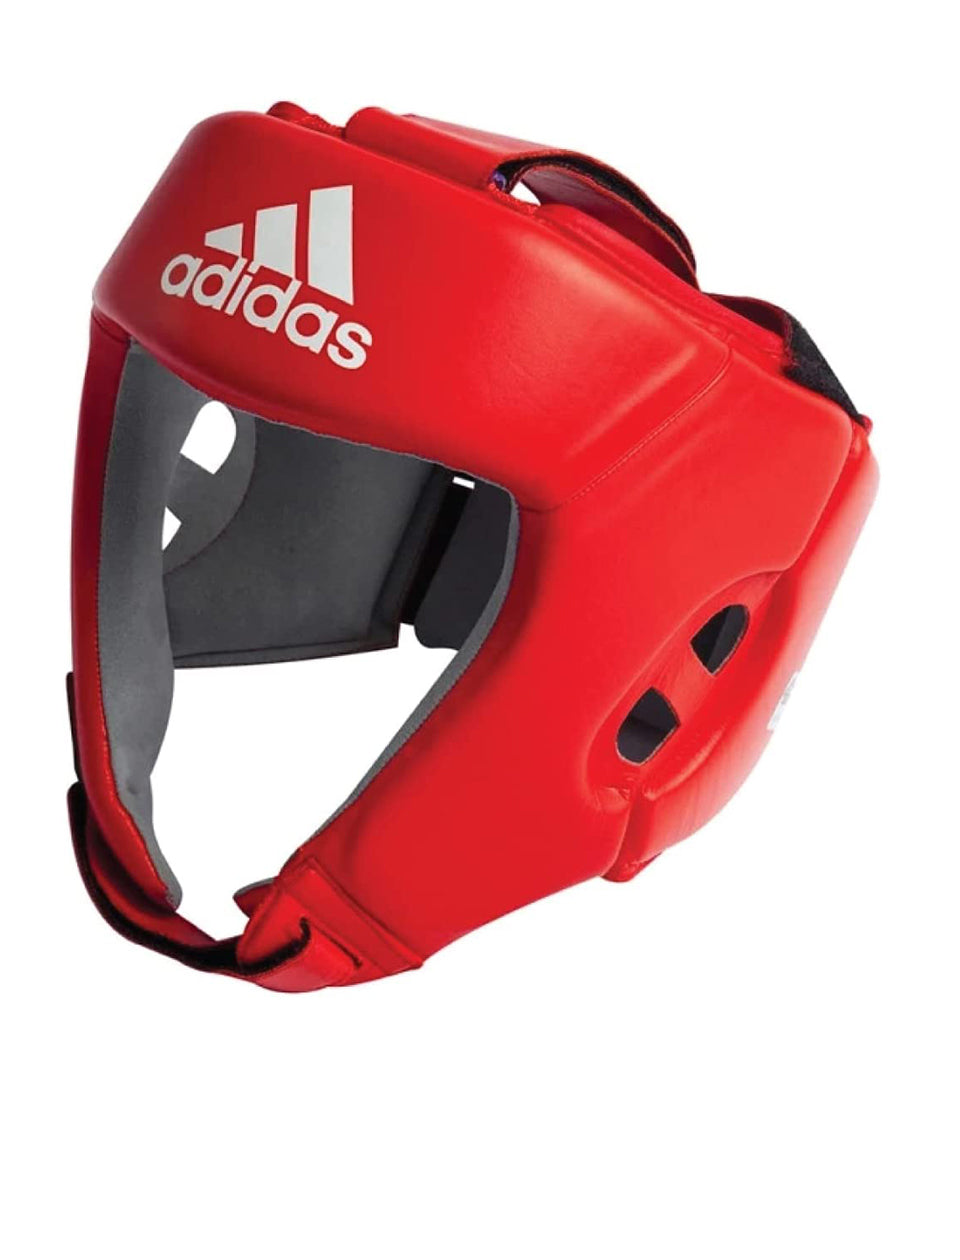 Adidas AIBA Approved Boxing Head Guard, Large , Red